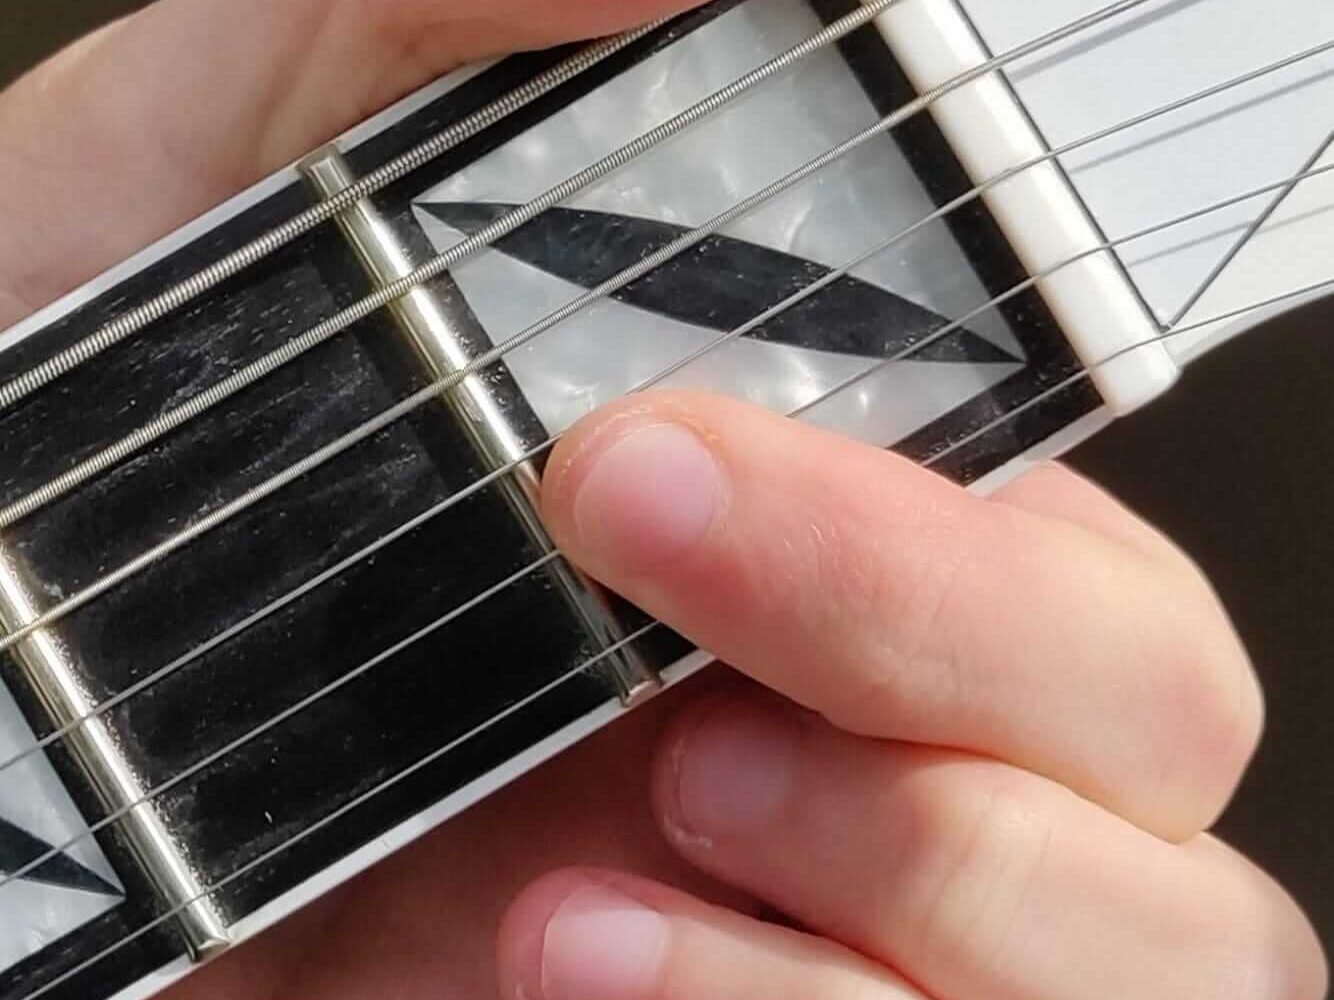 How to bar multiple notes down at once for playing chords.